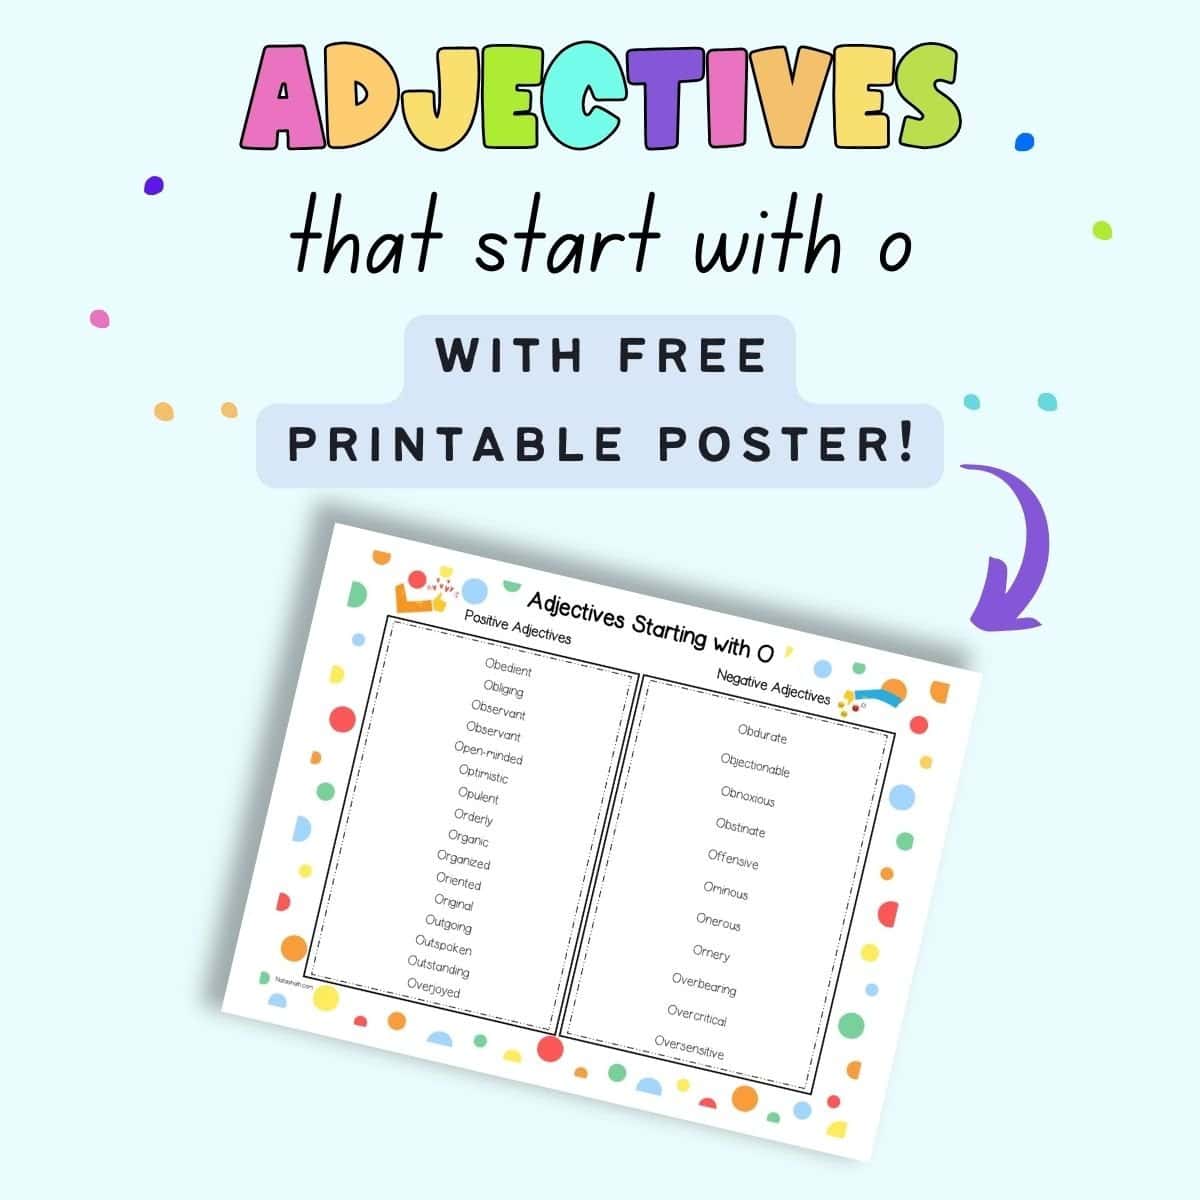 Text overlay "adjectives that start with o with fre printable poster" and a preview of a poster with adjectives